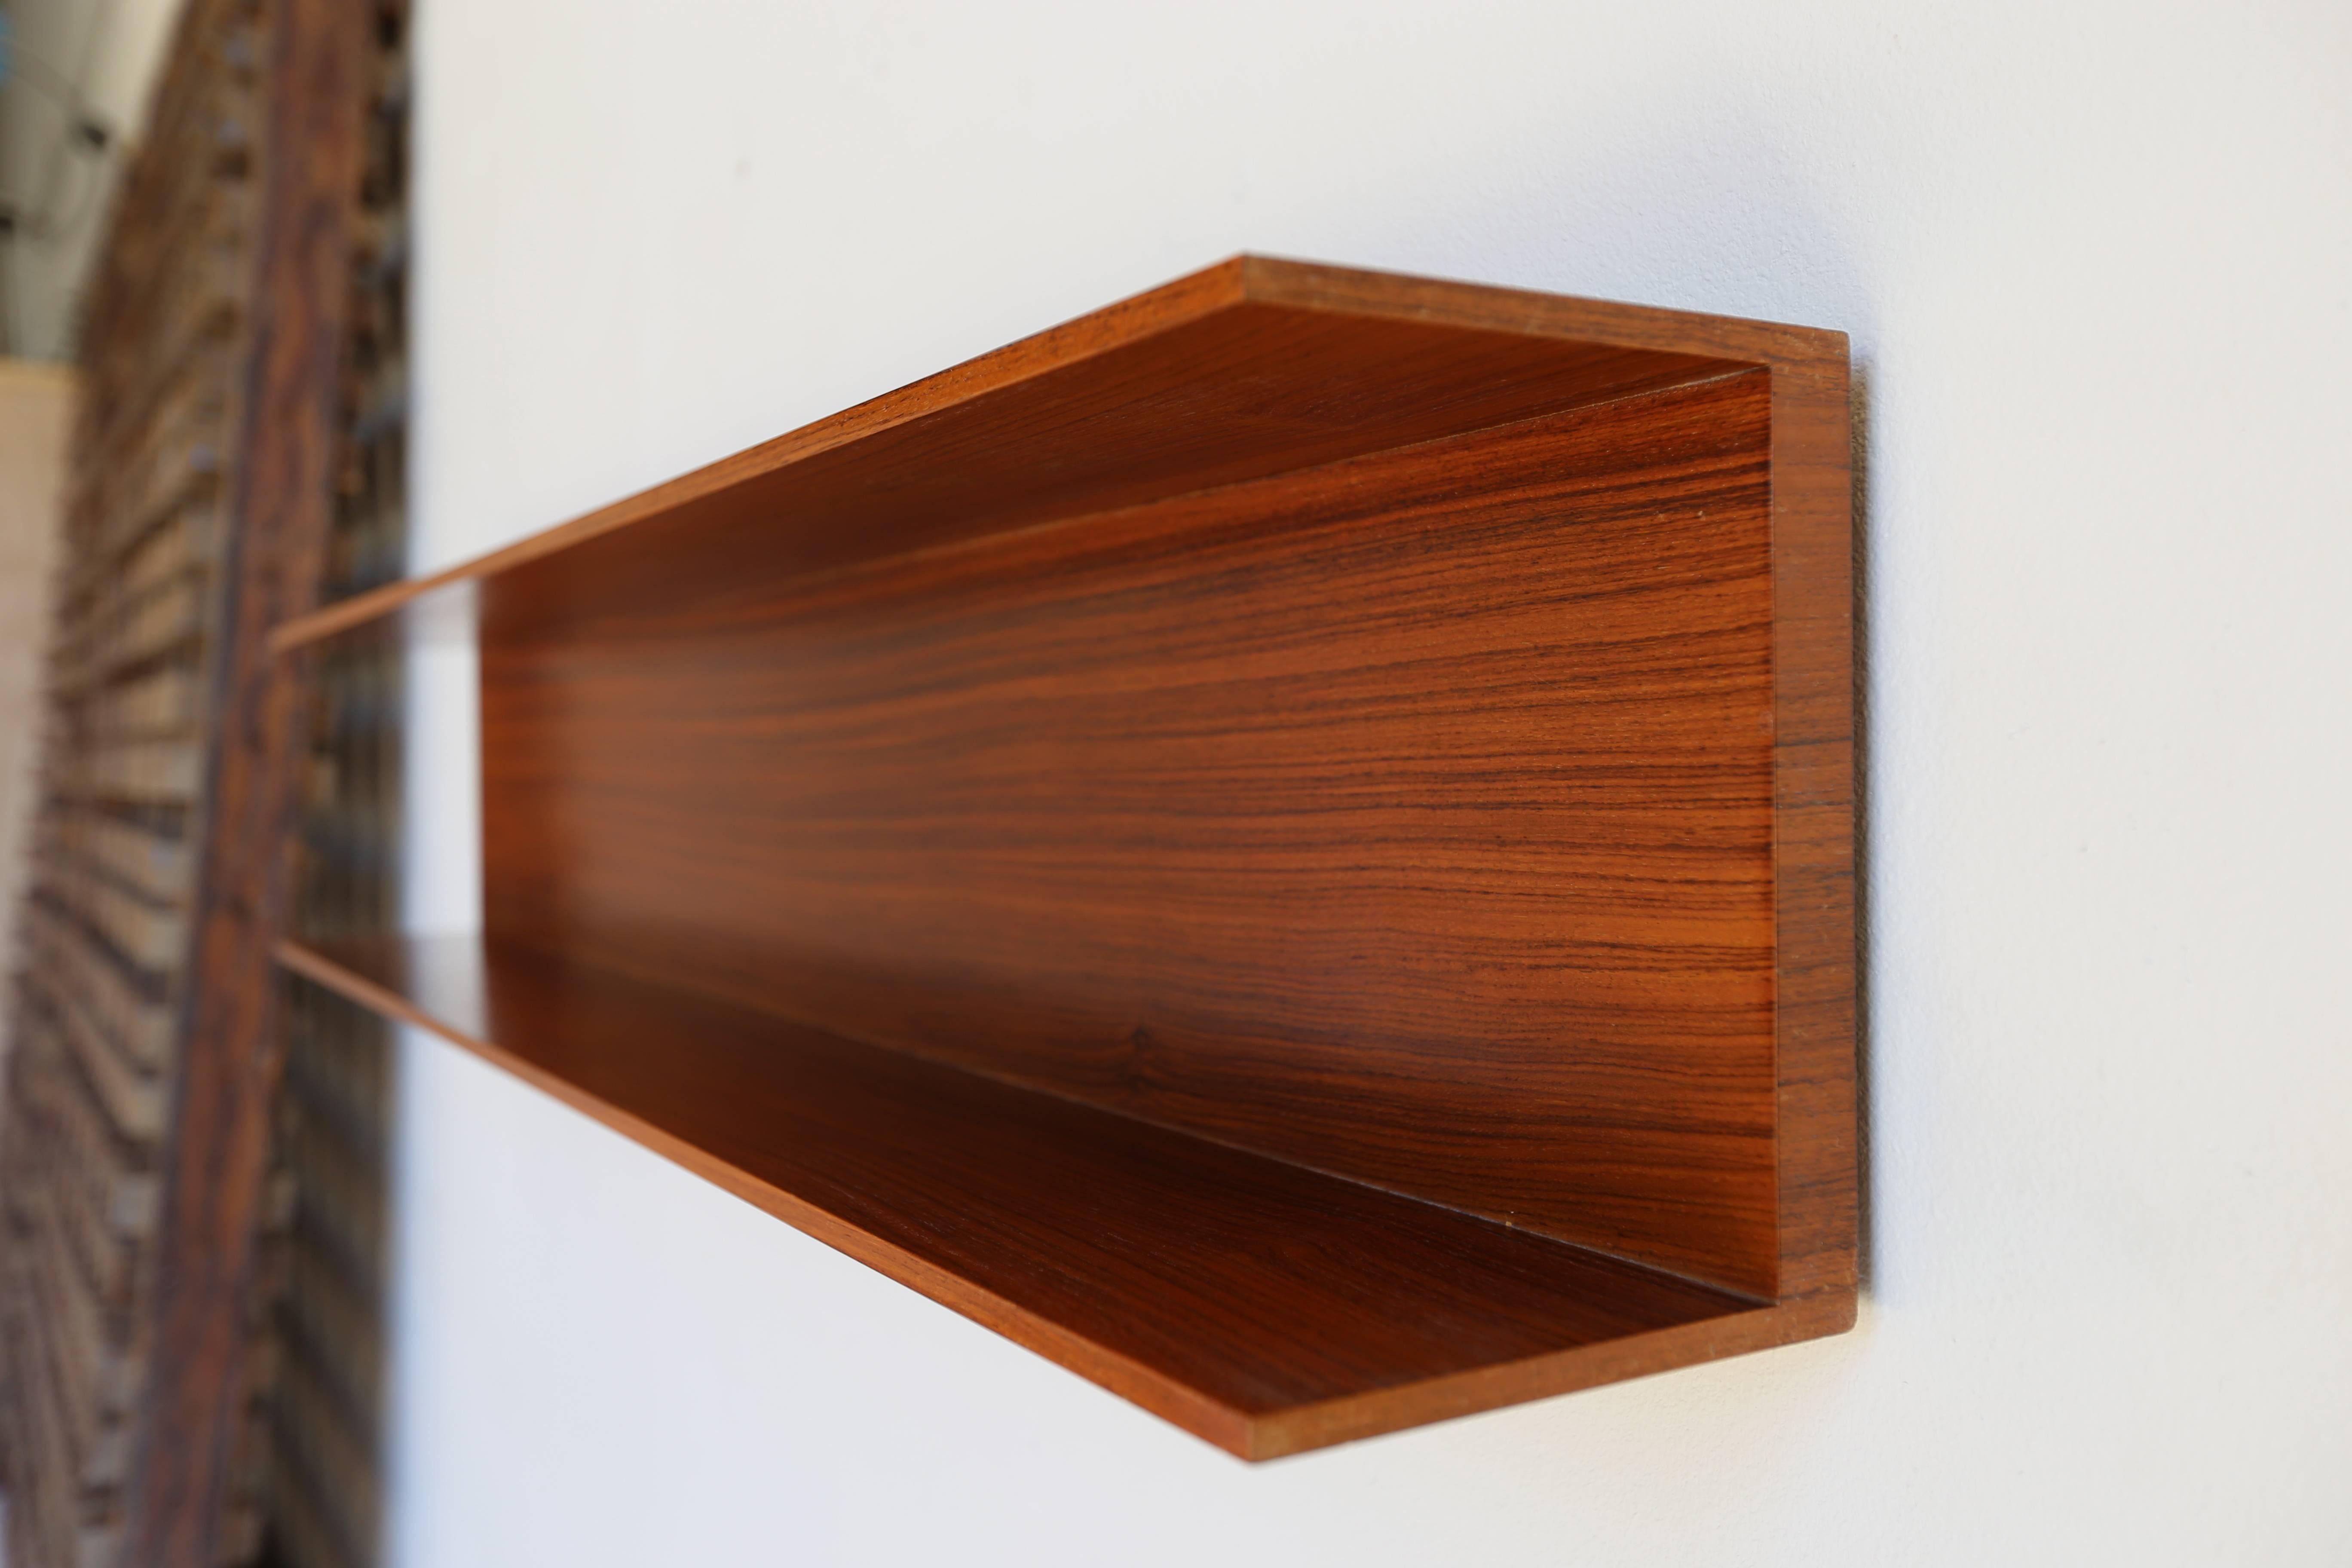 Rosewood floating and hanging shelf by Walter Wirtz for Wilhelm Renz of Germany.

MOVING SALE!!!